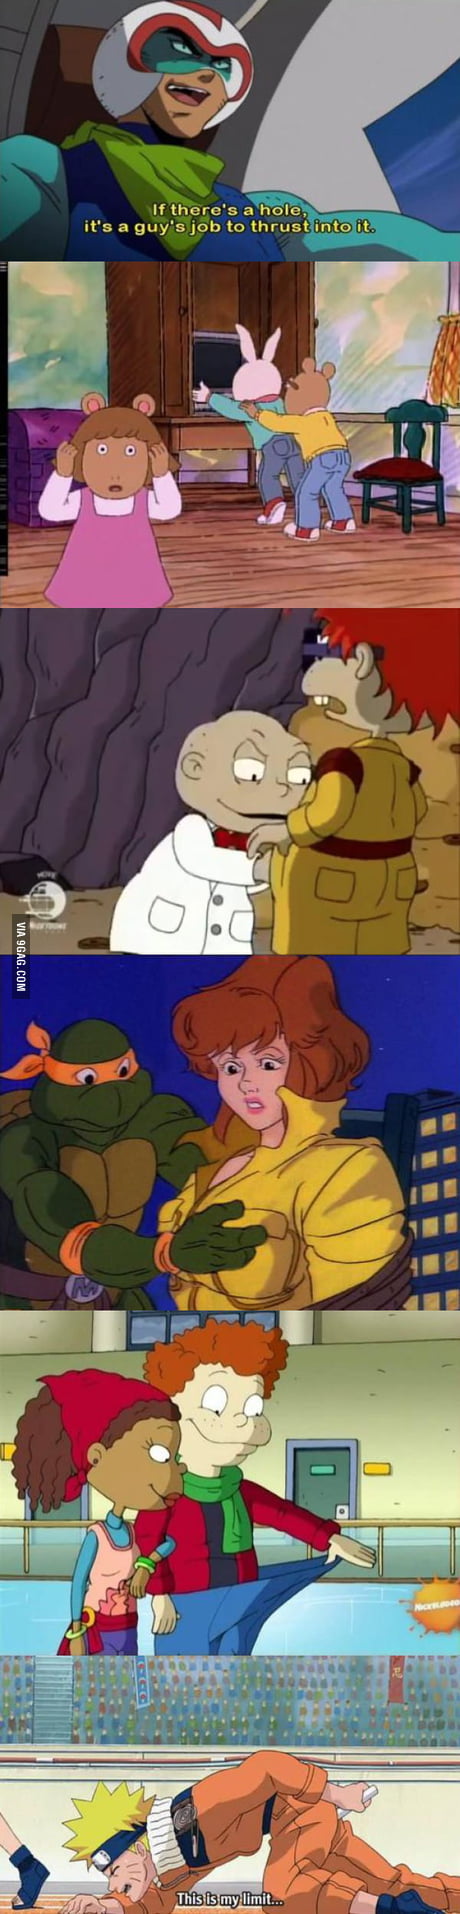 Taking cartoons out of context... right in the childhood. - 9GAG